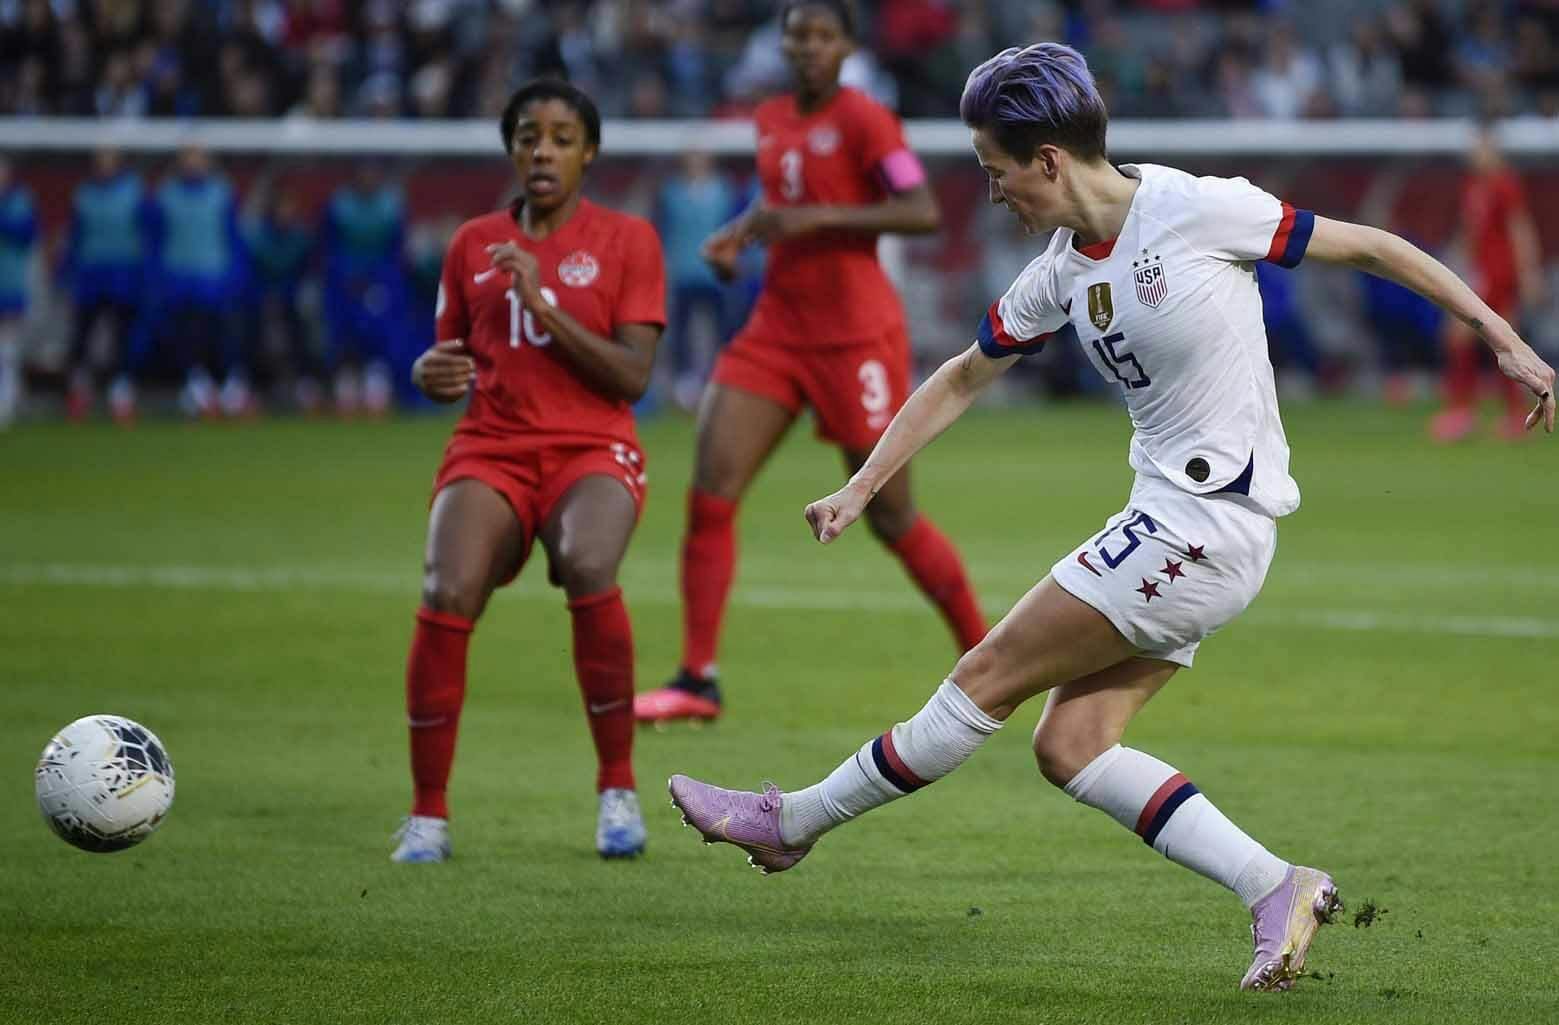 United States forward Megan Rapinoe (15) shoots against Canada during the second half of the CONCACAF Women's Olympic Qualifying soccer tournament at Dignity Health Sports Park. - USA TODAY Sports